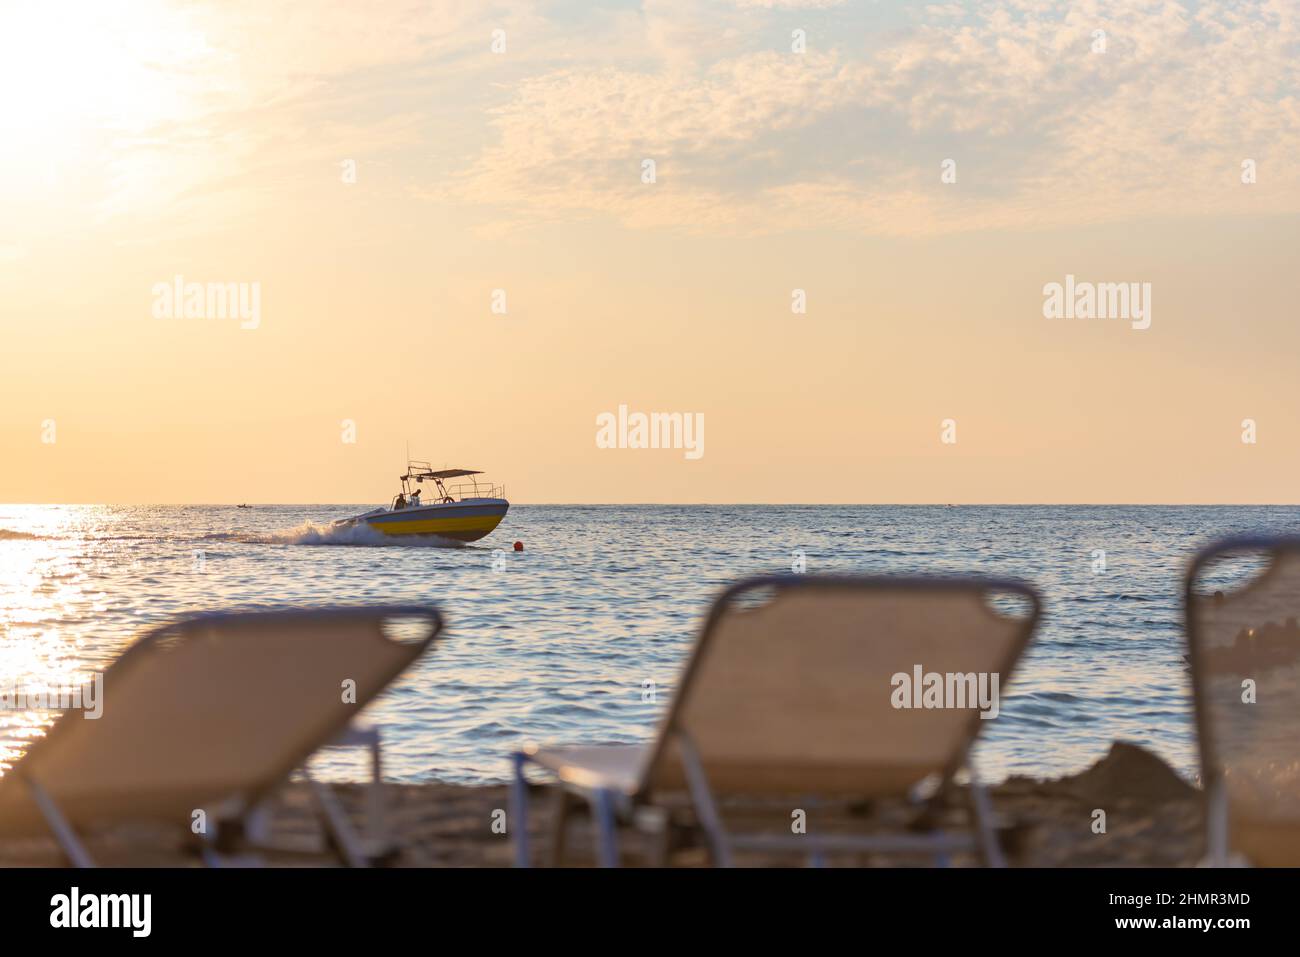 The backs of the sun loungers in front of the sea with a boat. Evening on the beach. Focus on the boat. Stock Photo